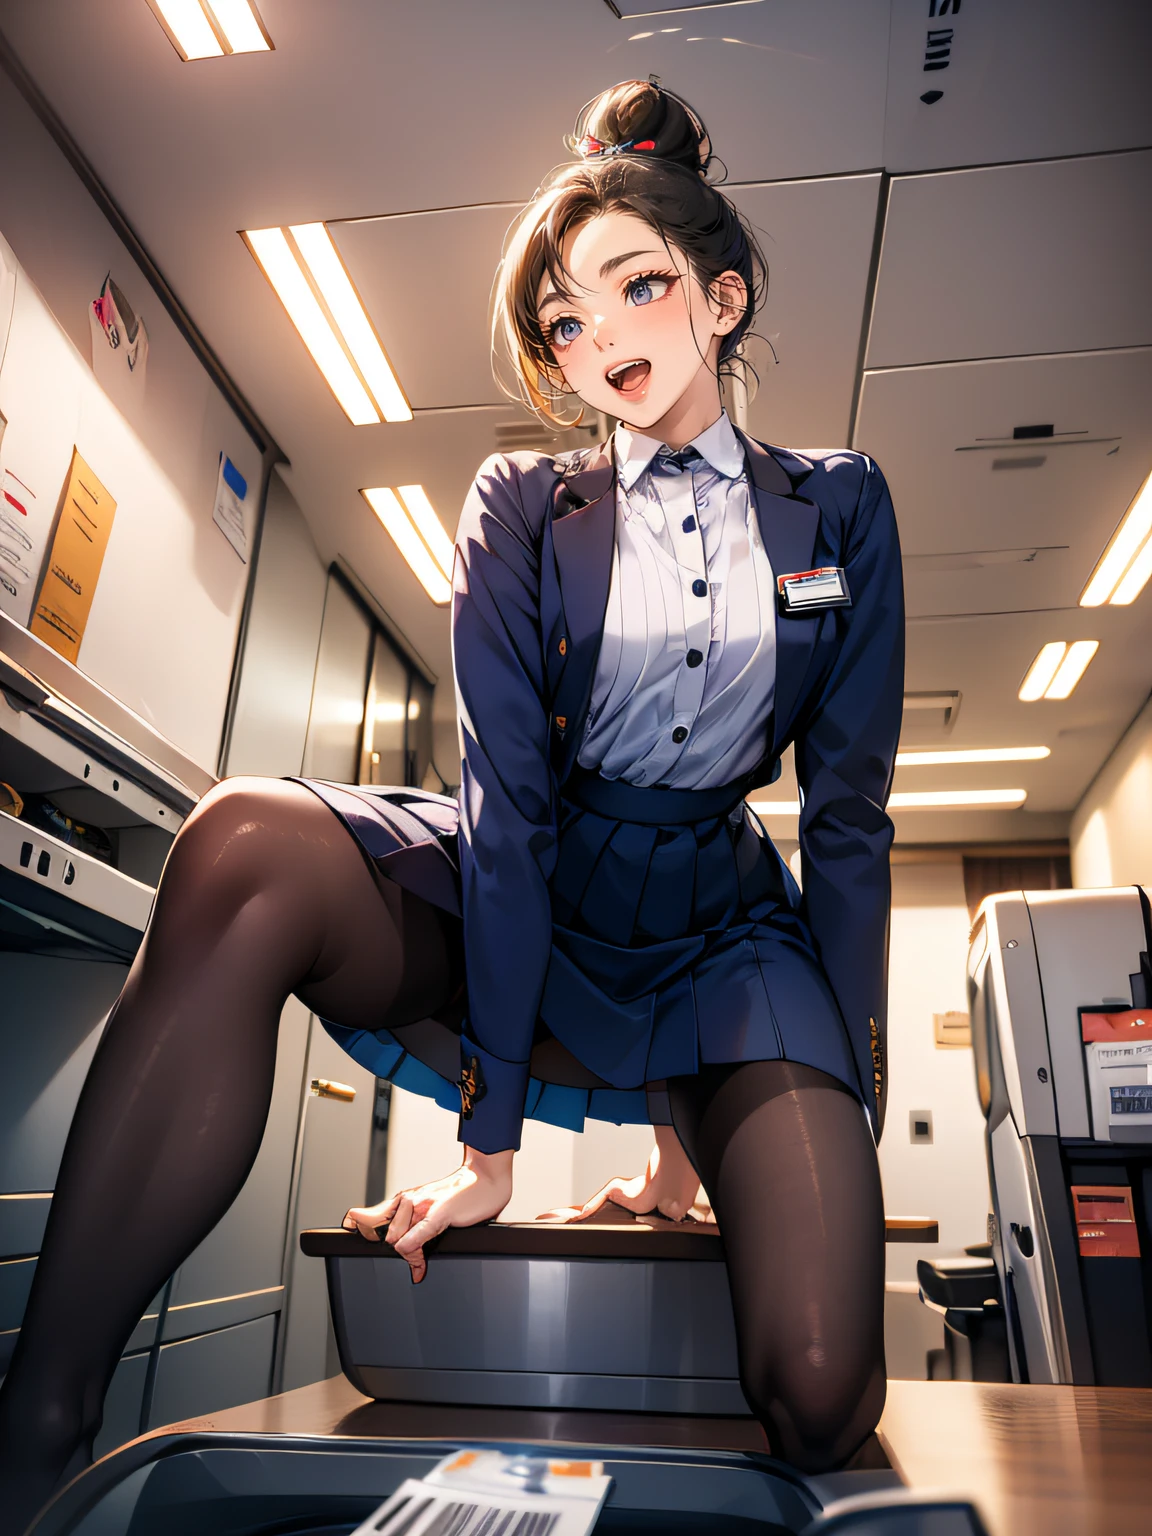 clerk uniform, (pantyhose), hair up, name plate, ID card, (whole body), straddling to hit her crotch on counter edge, open legs, raise leg, open mouth, masturbation, ecstasy face, in the plane, customers, ceiling,